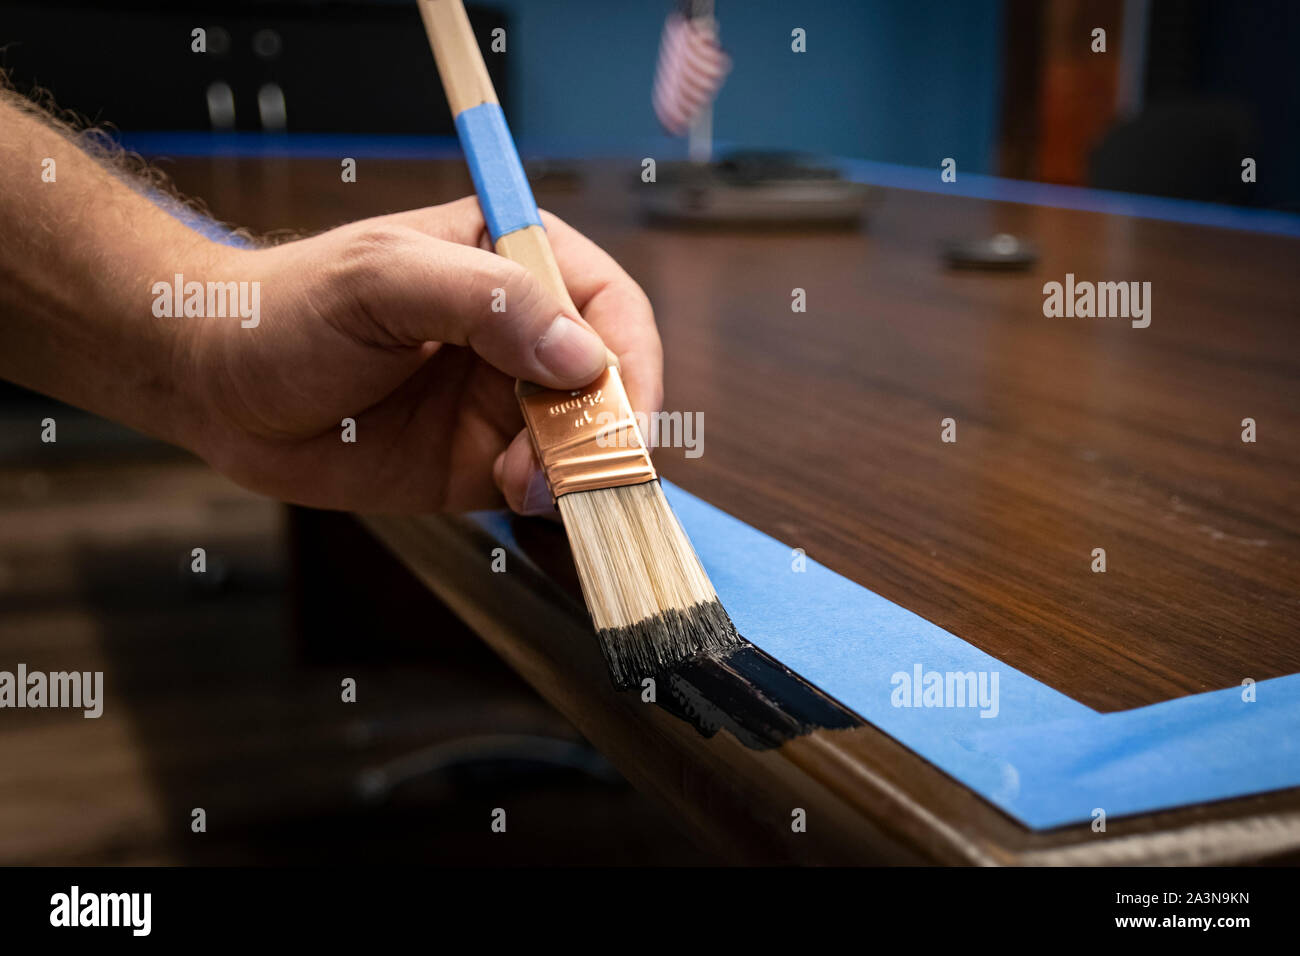 Hand painting conference table edge/trim; prepped with blue painter's tape Stock Photo